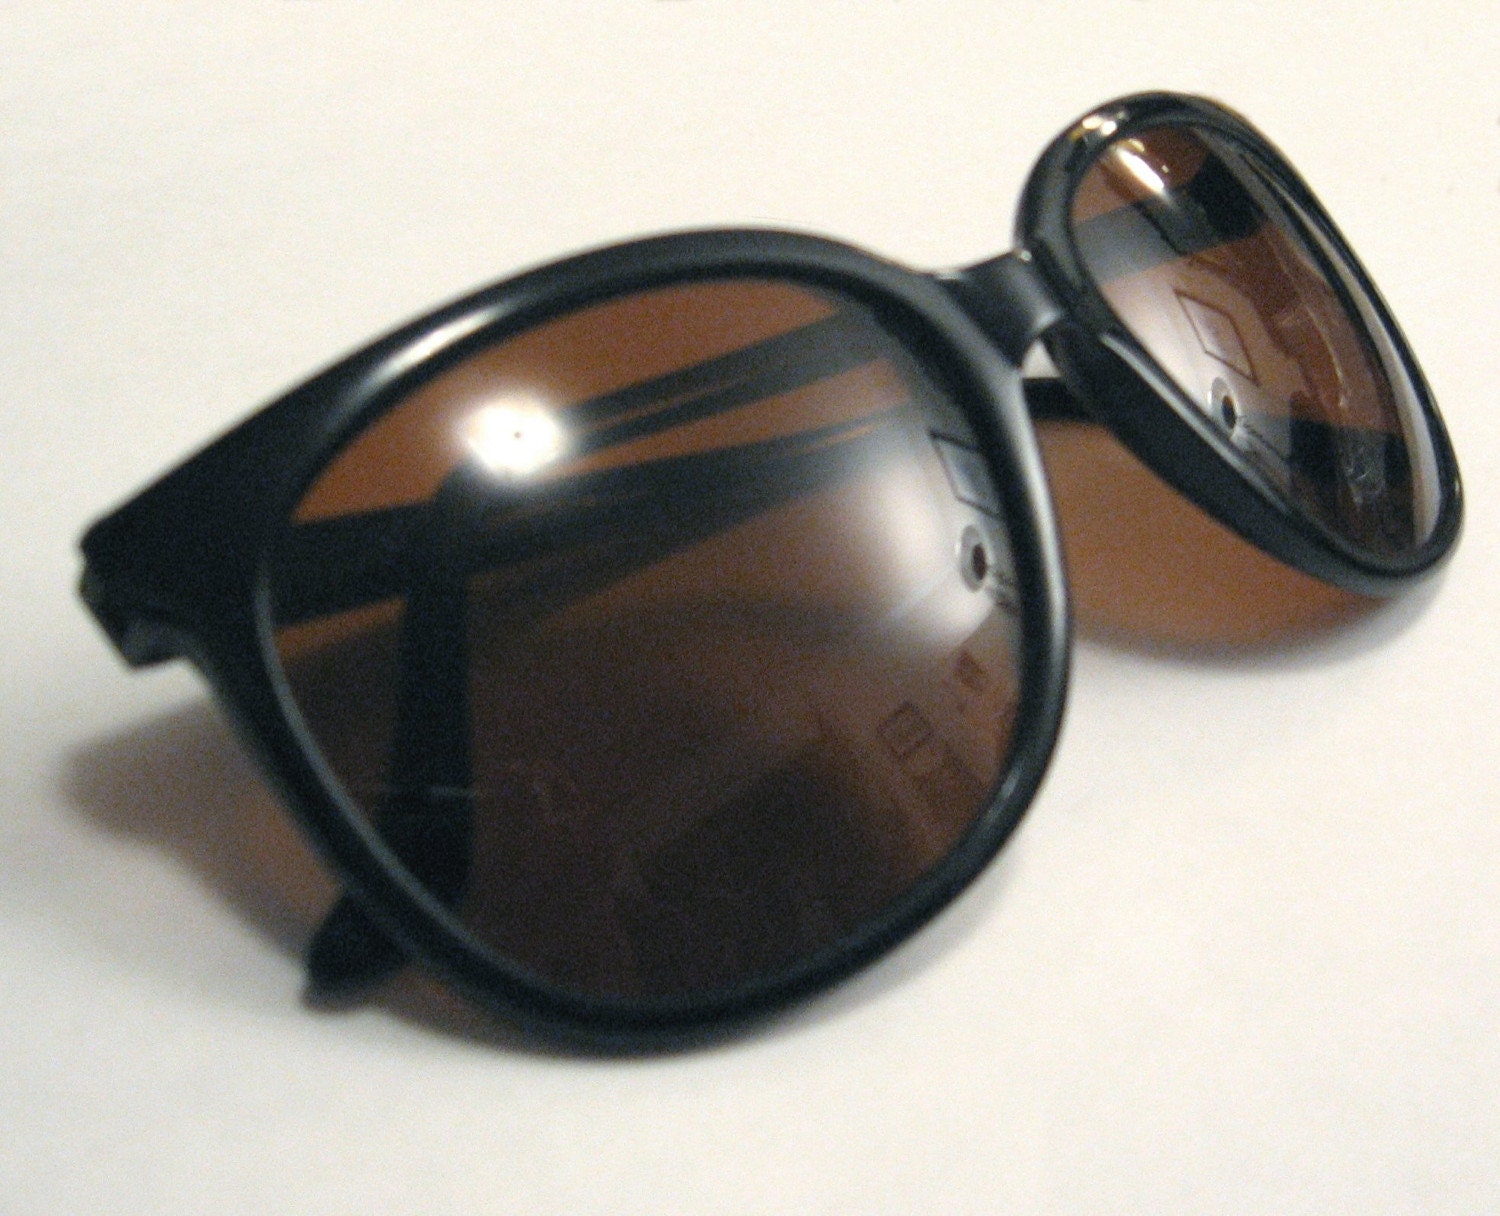 Bolle Acrylex 80s Vintage Sunglasses by soph80 on Etsy